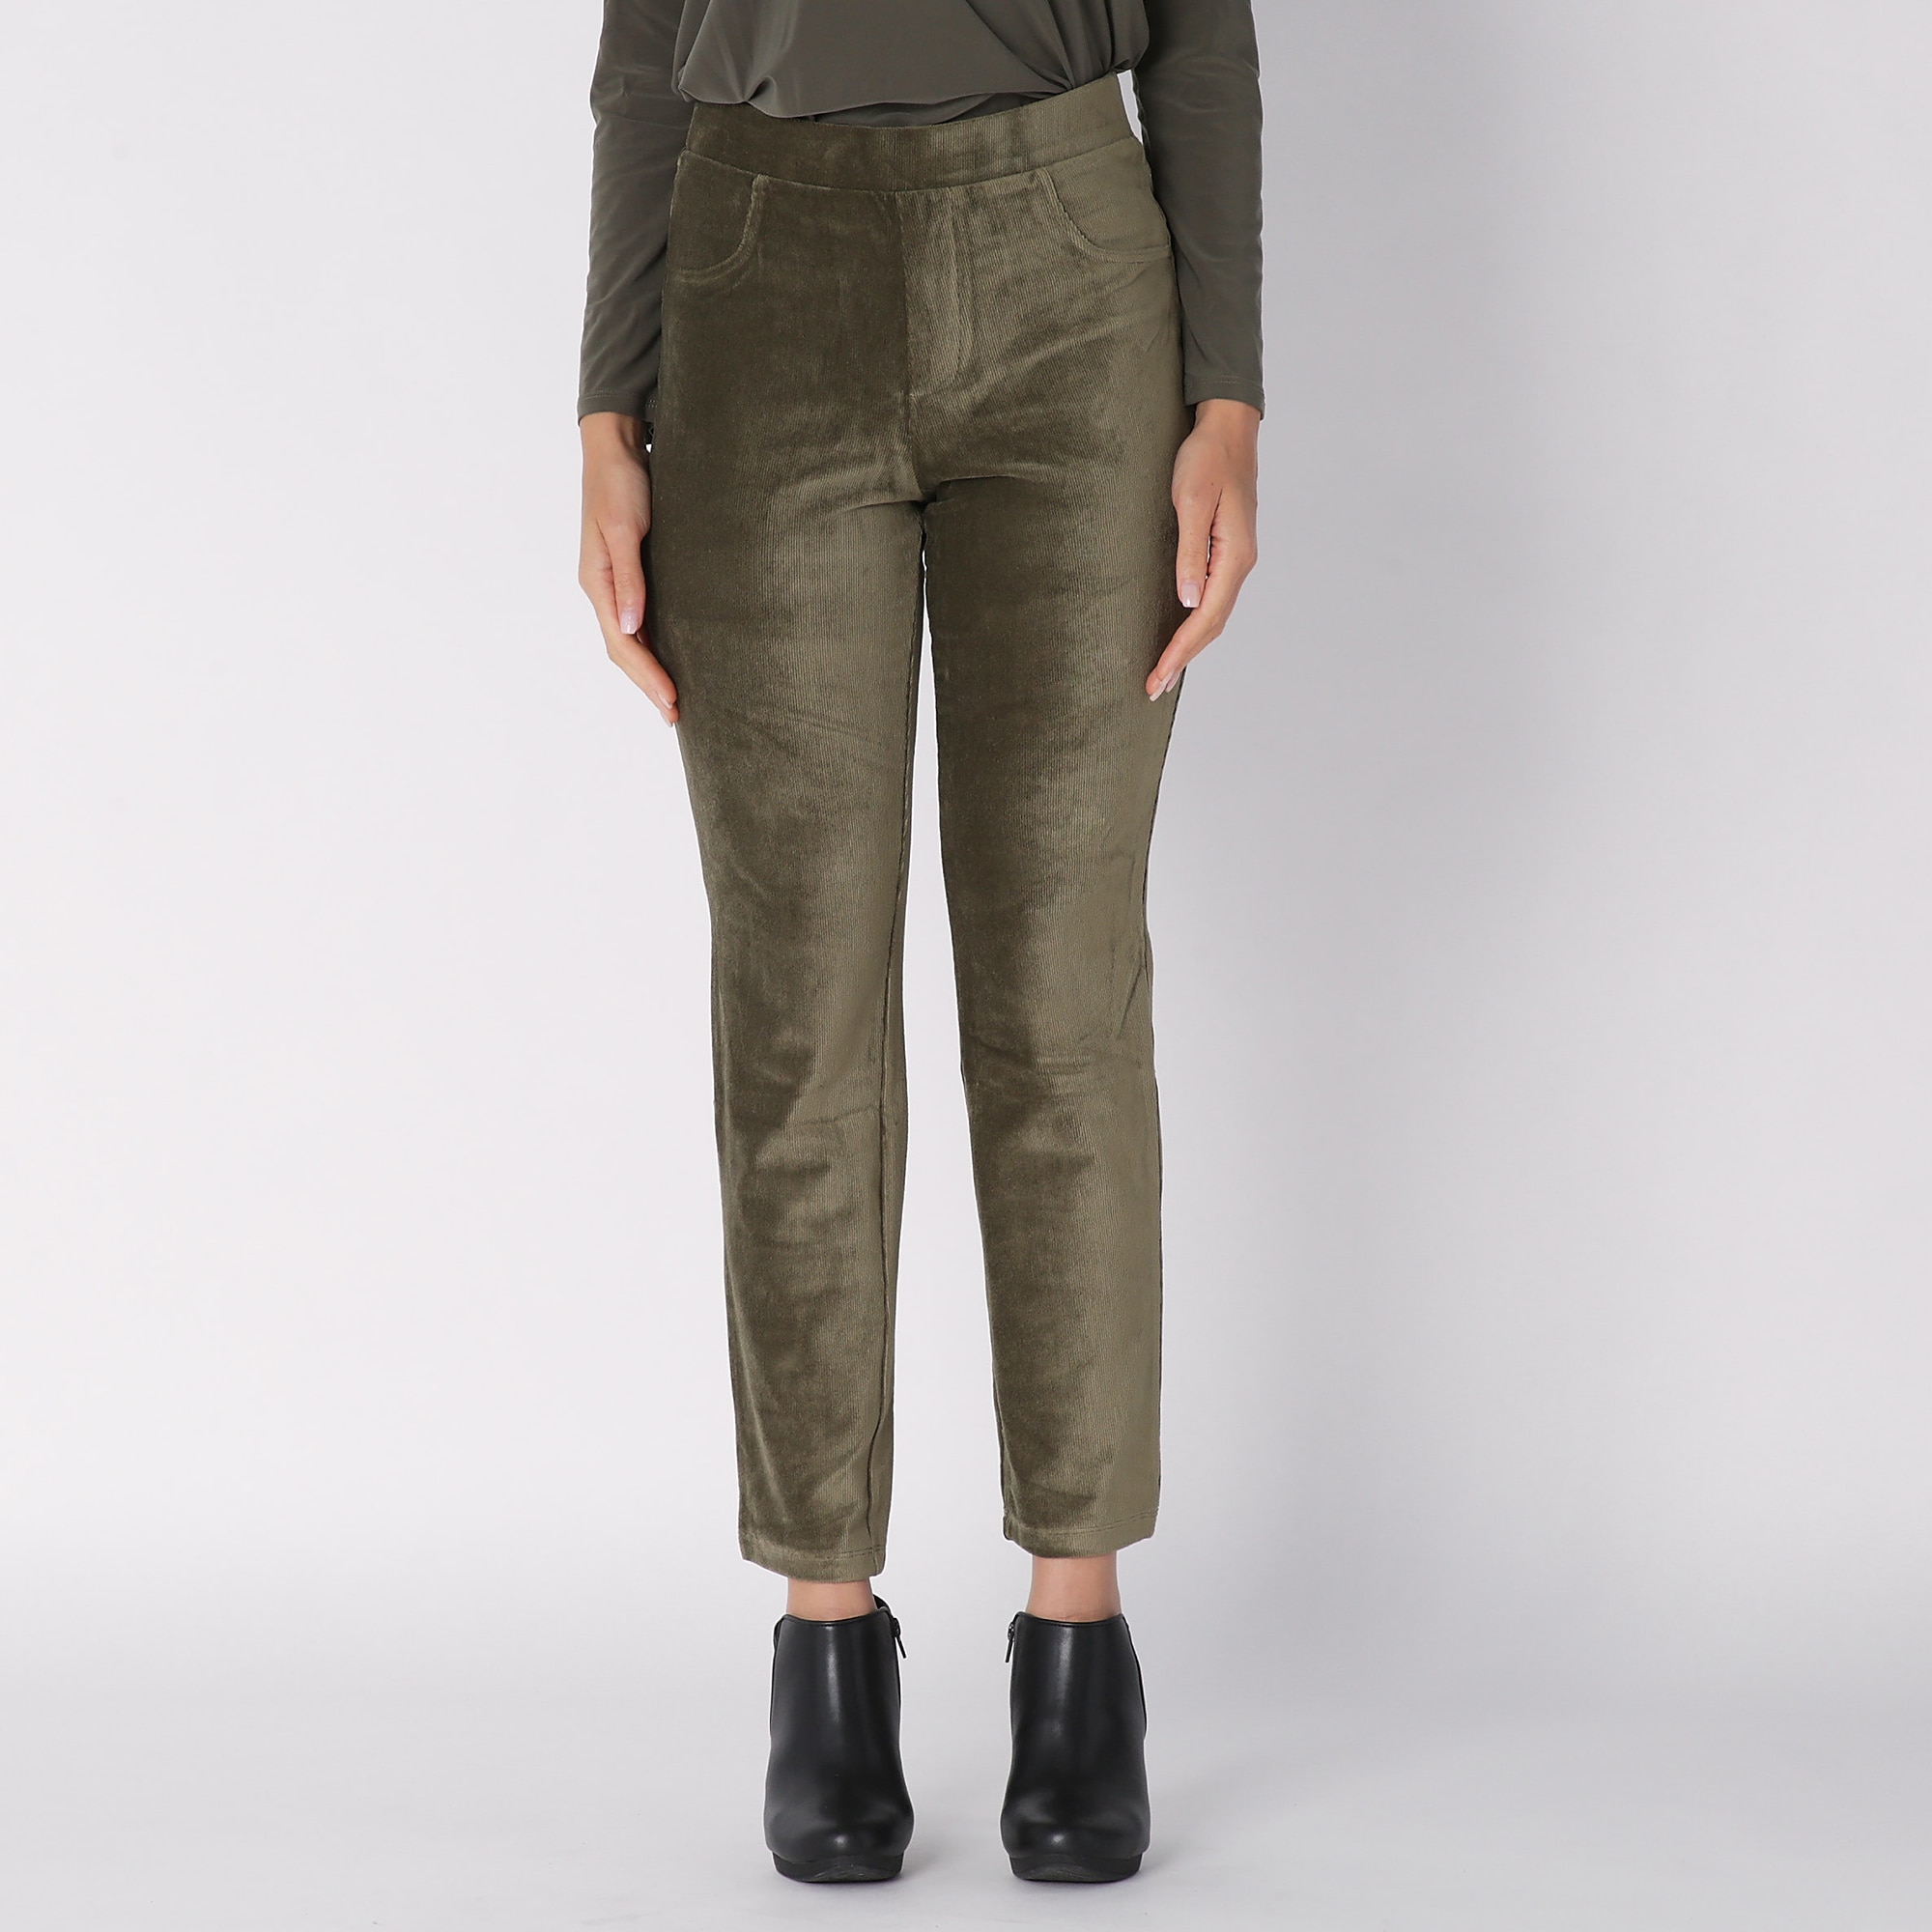 Clothing & Shoes - Bottoms - Pants - Nina Leonard Stretch Corduroy Pant -  Online Shopping for Canadians